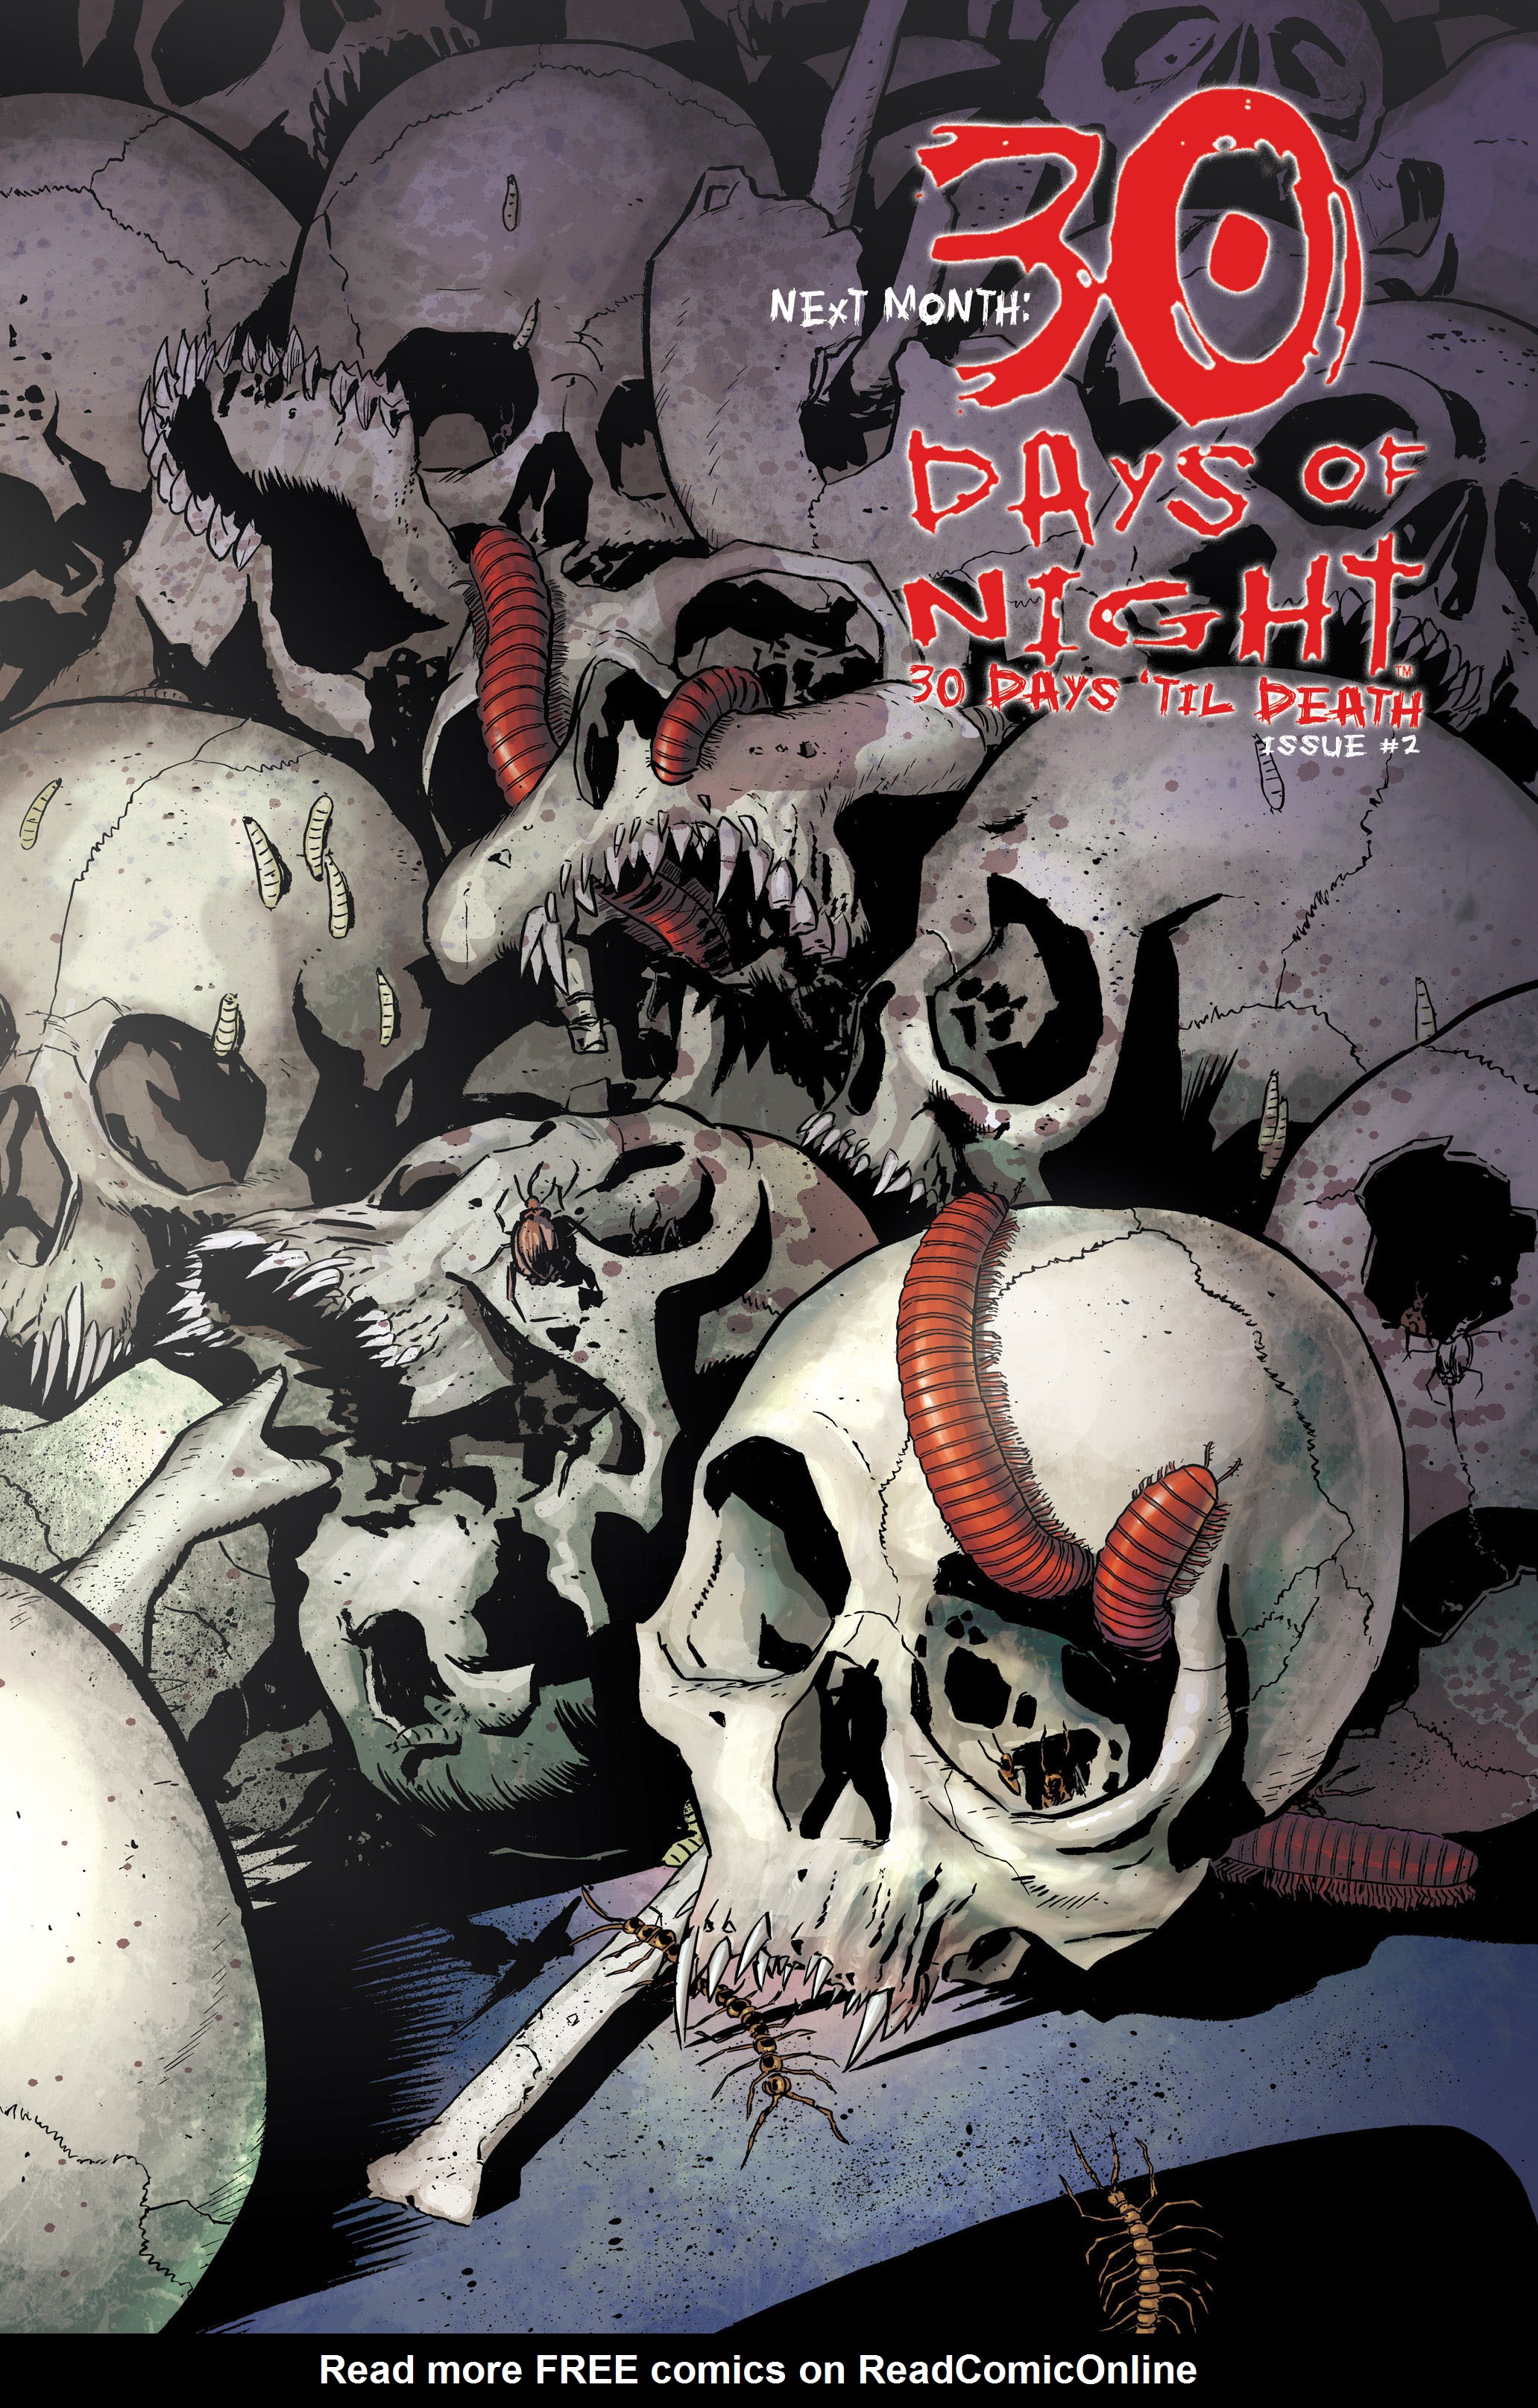 30 Days of Night: 30 Days 'til Death Issue #1 #1 - English 25